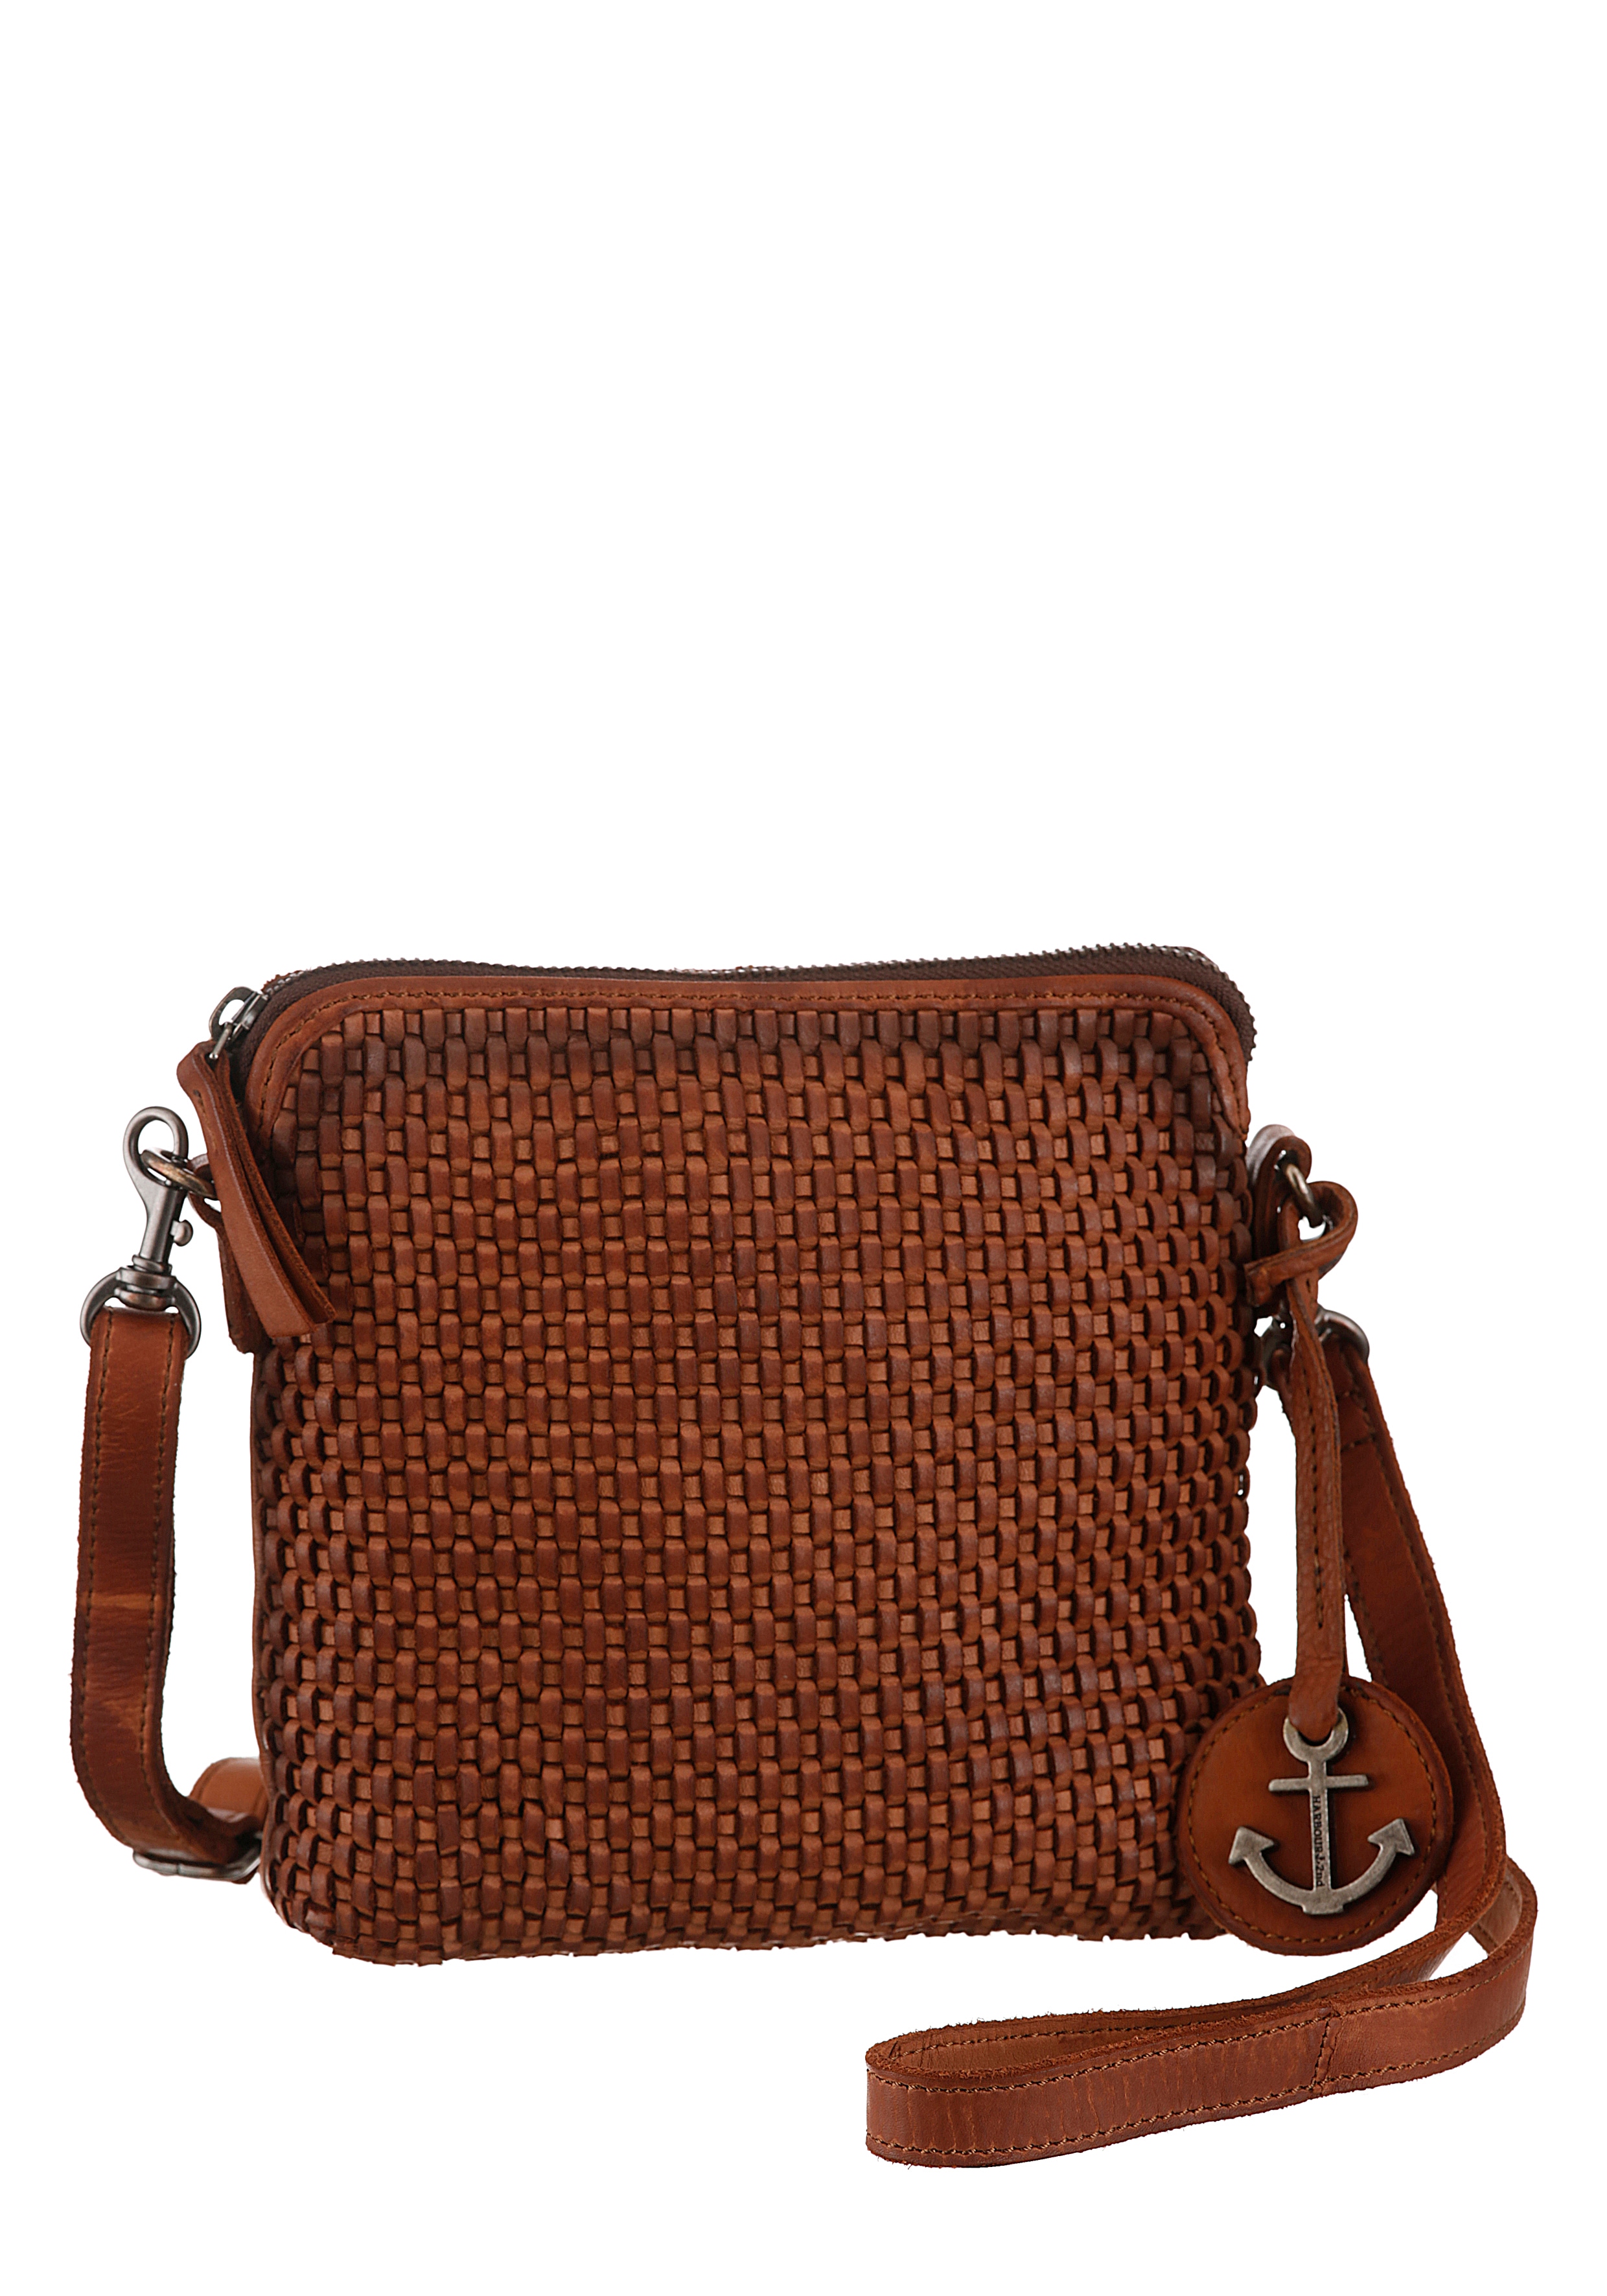 Harbour2nd Thelma Größe One size Charming Cognac